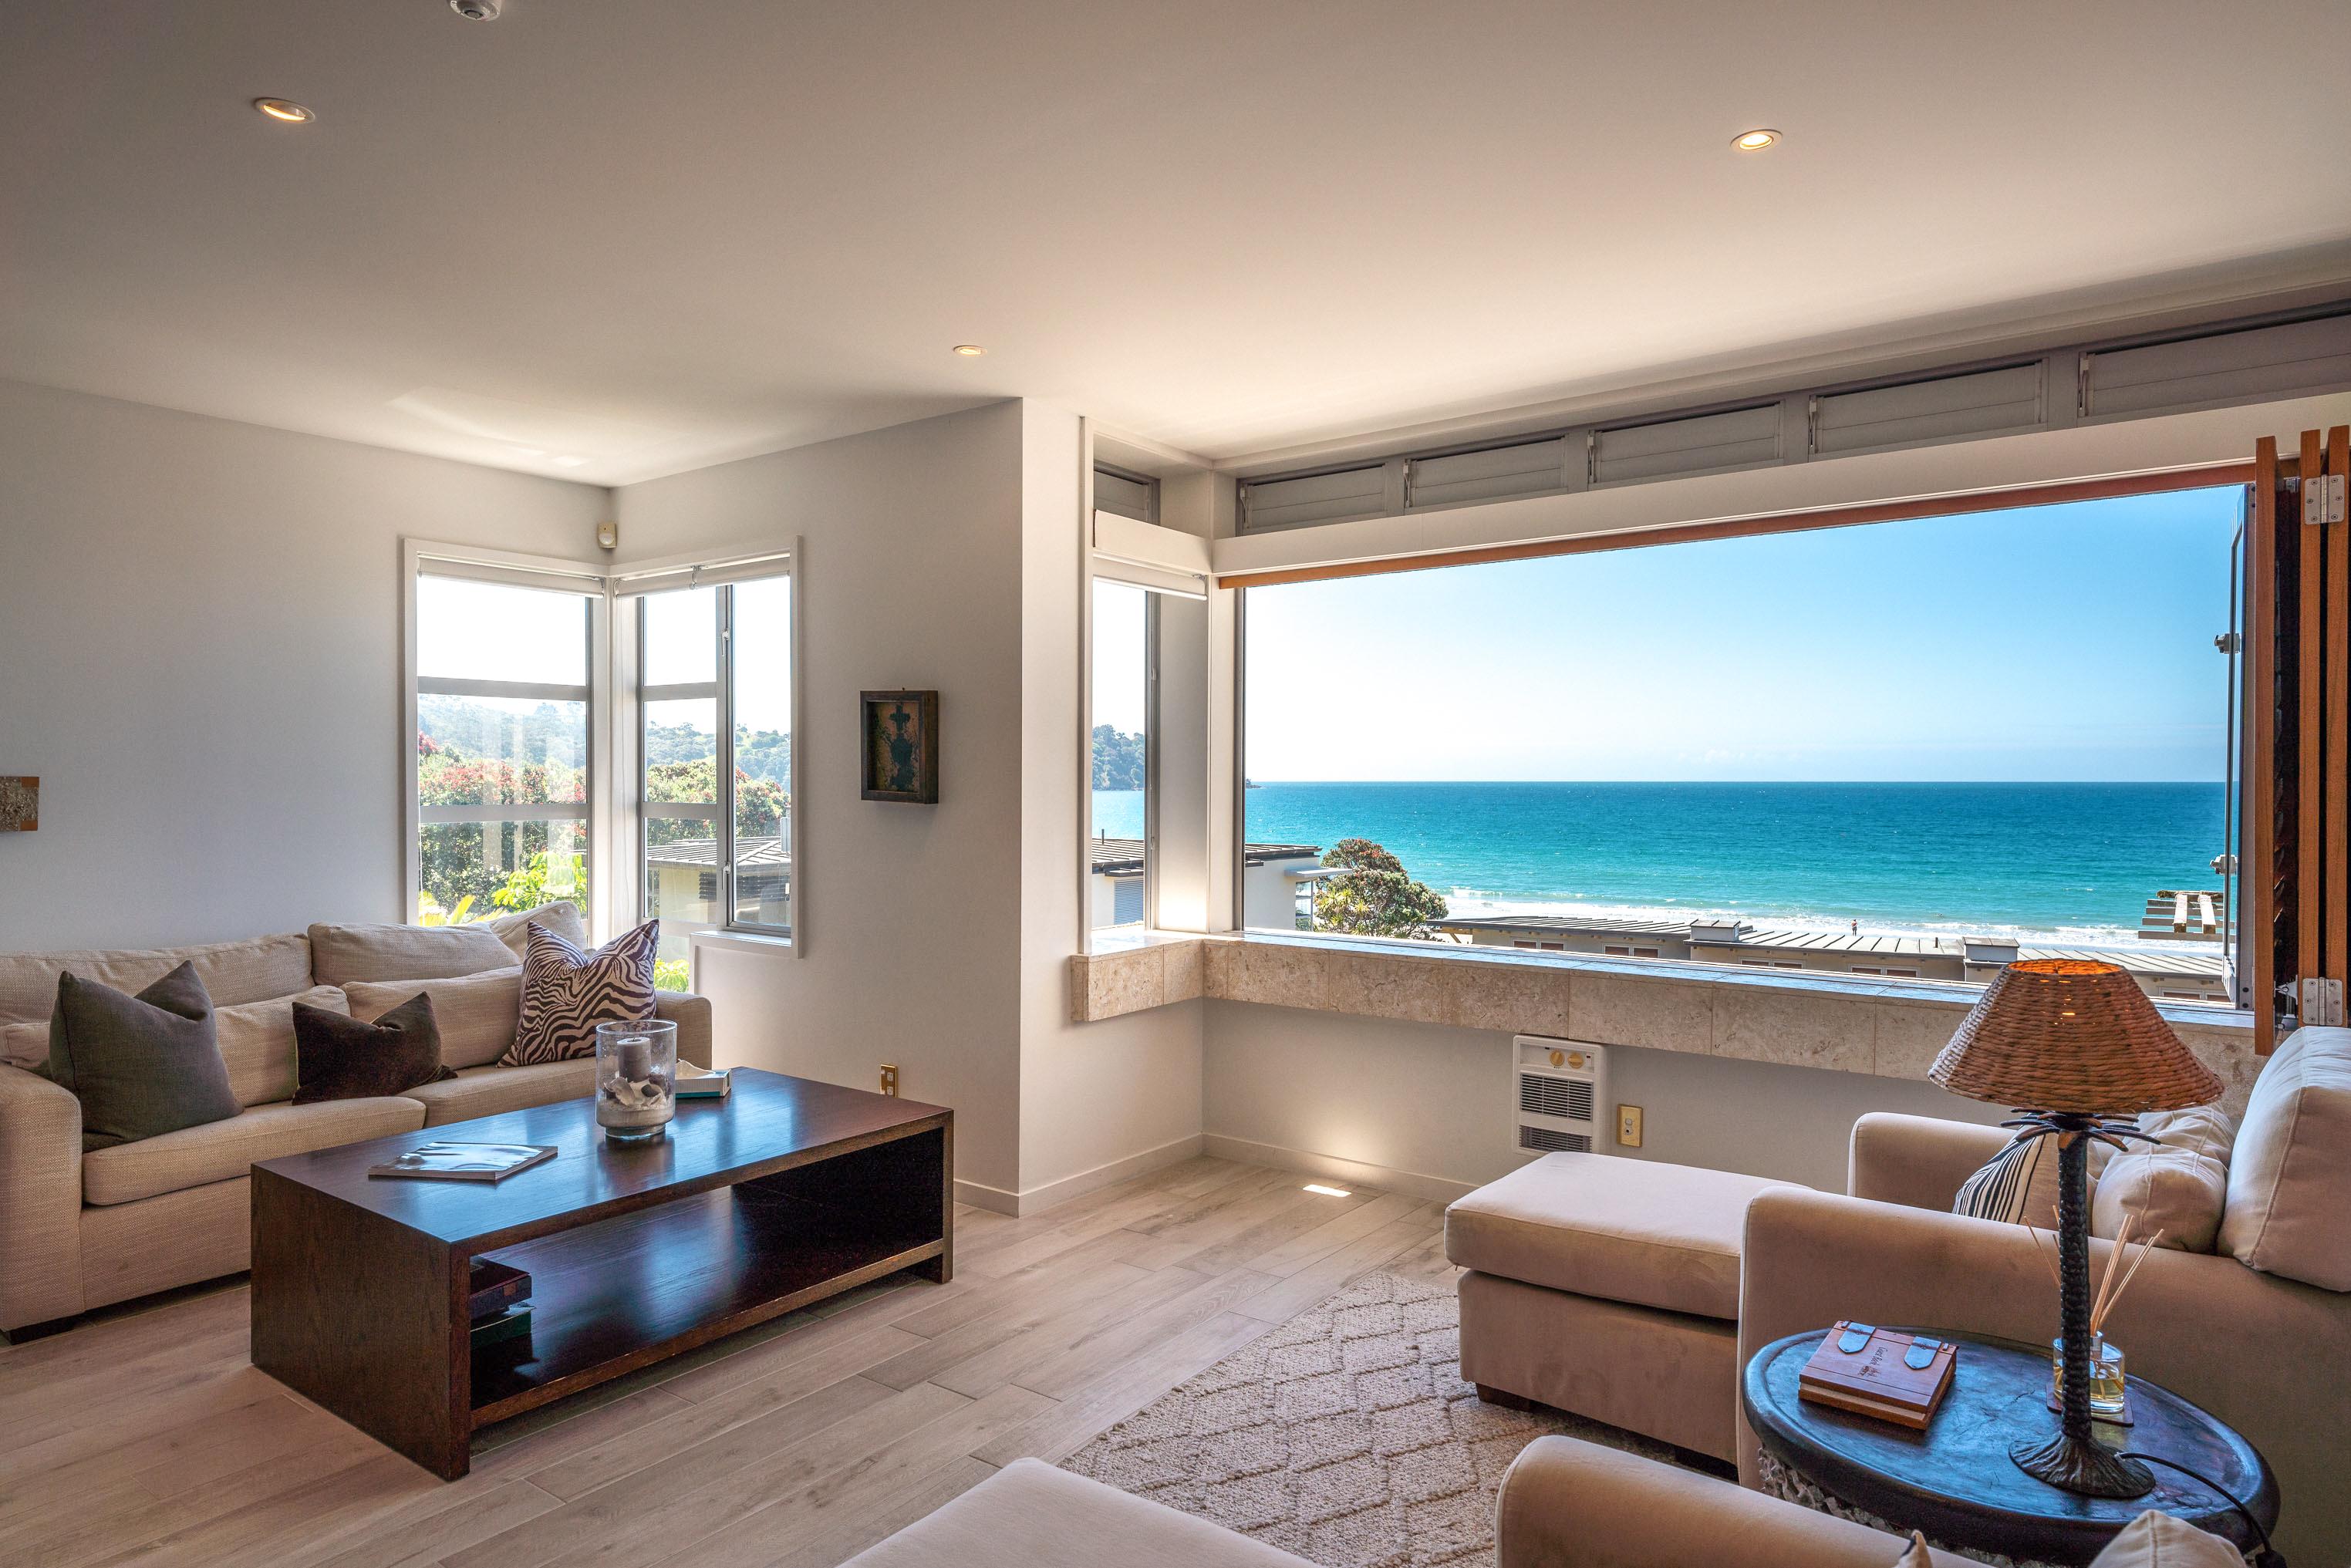 Property Image 2 - Sunshine On The Beach - The Sands Unit 10